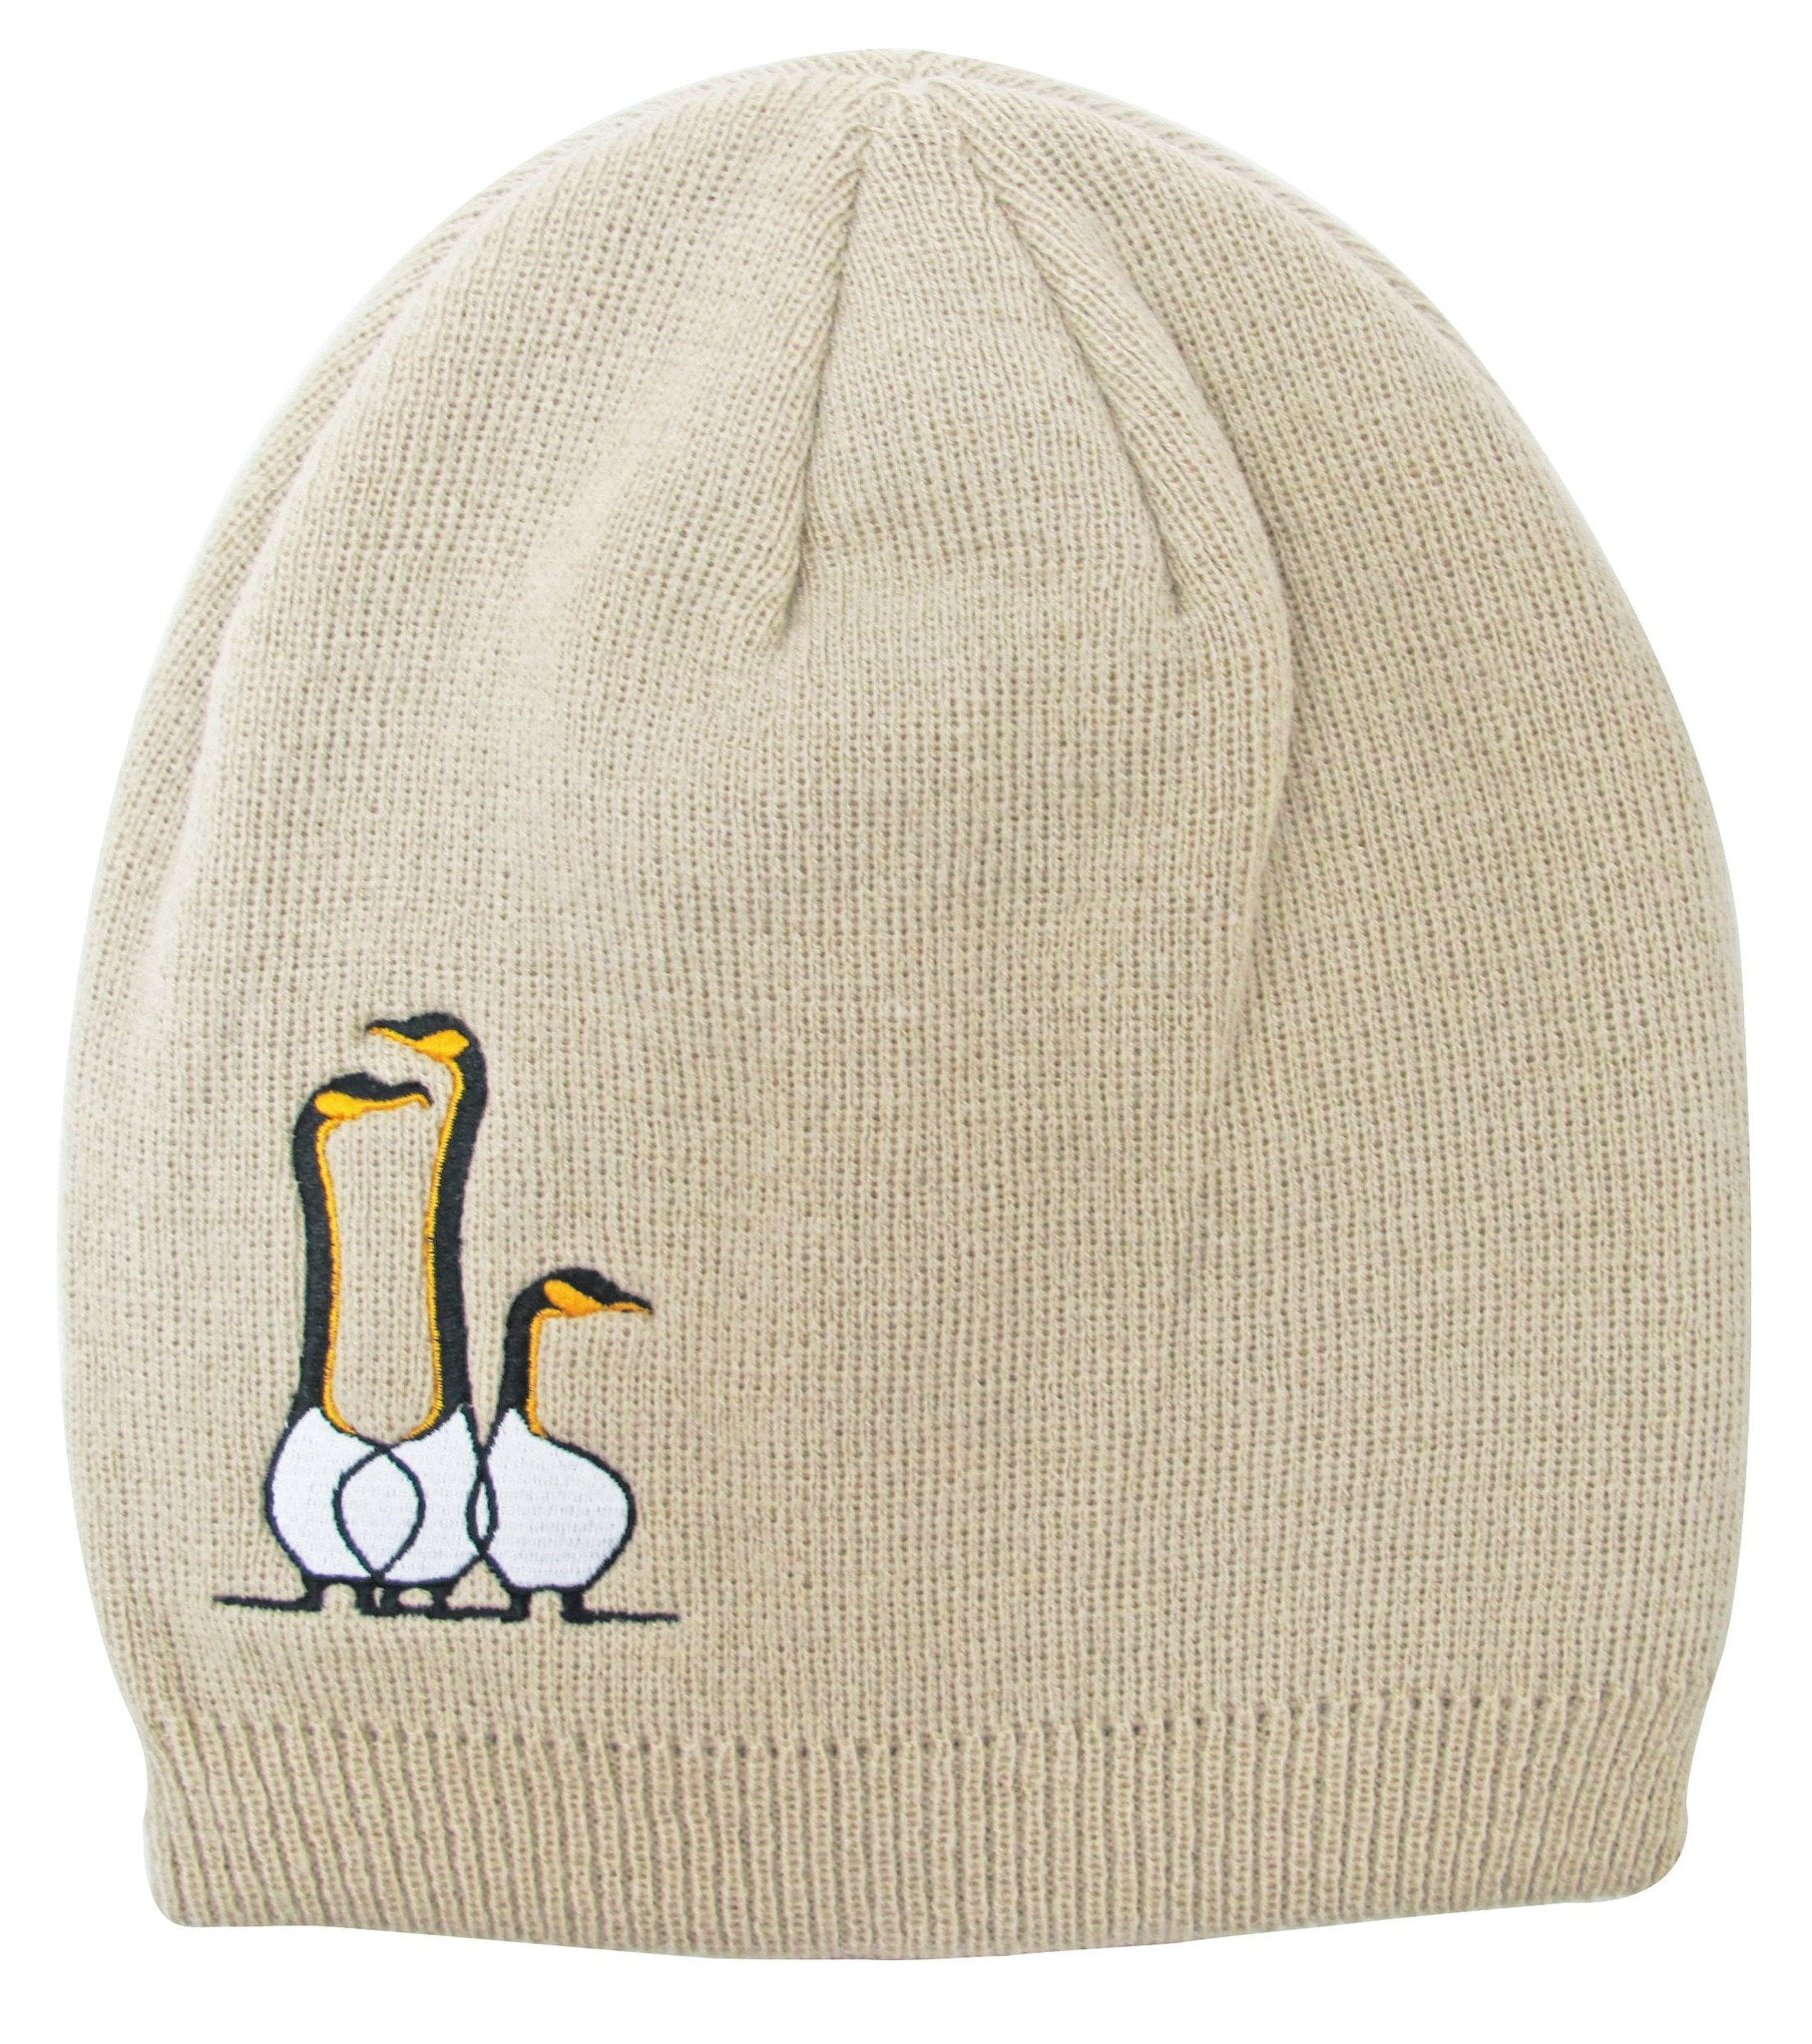 Benjamin Chee Chee Friends Embroidered Knitted Hat - Oscardo